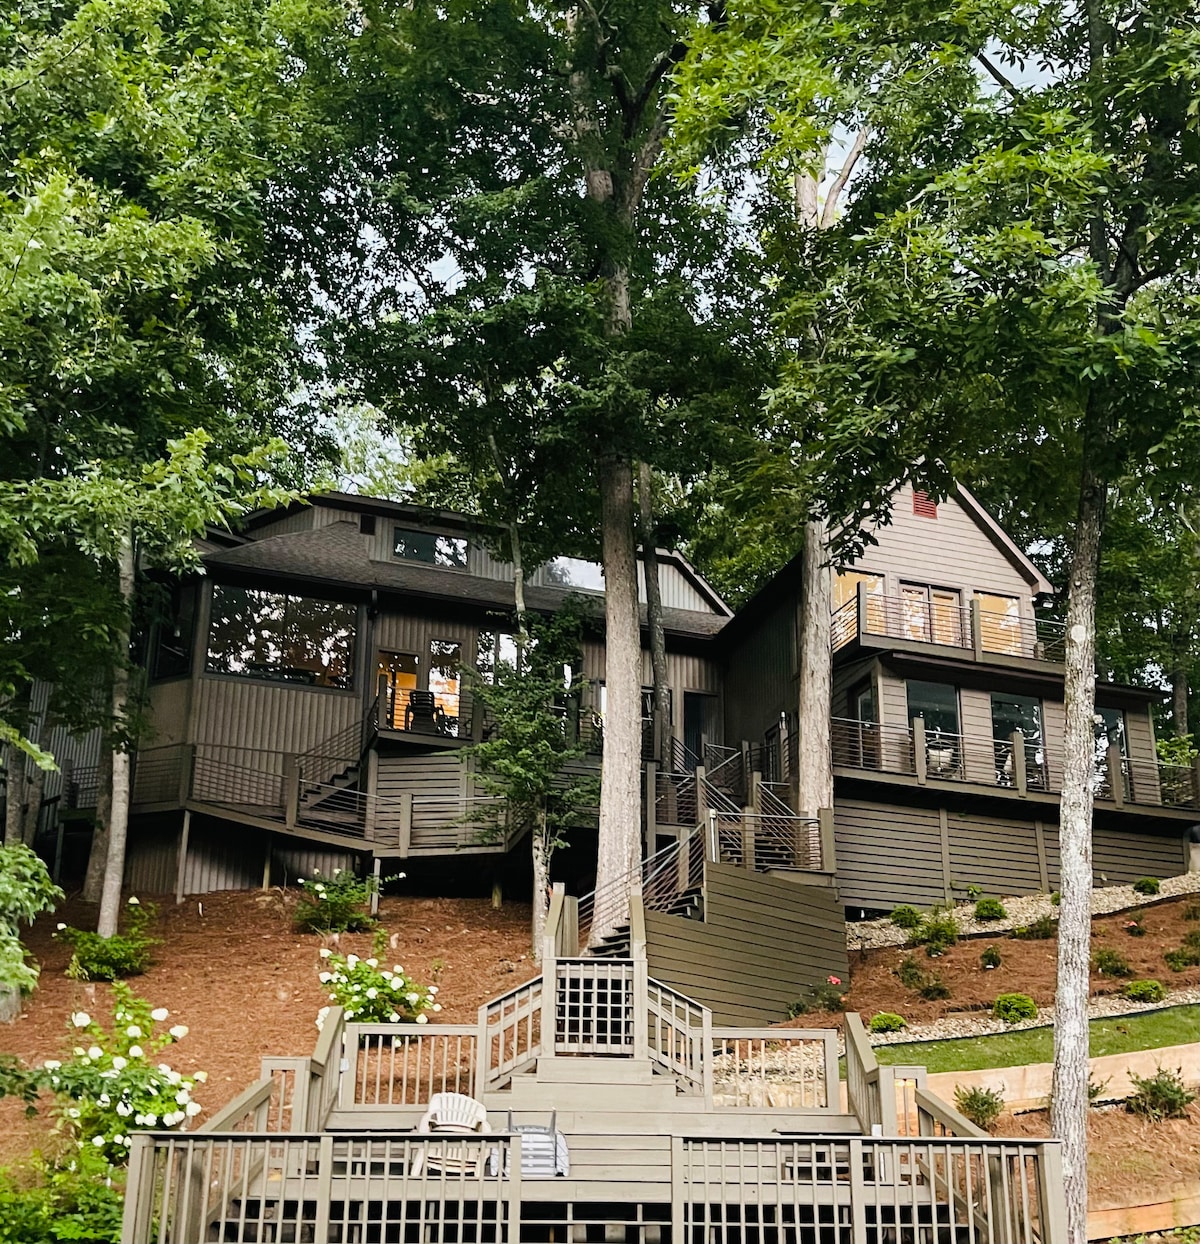 Grand Lakeview: Double decker dock, hot tub